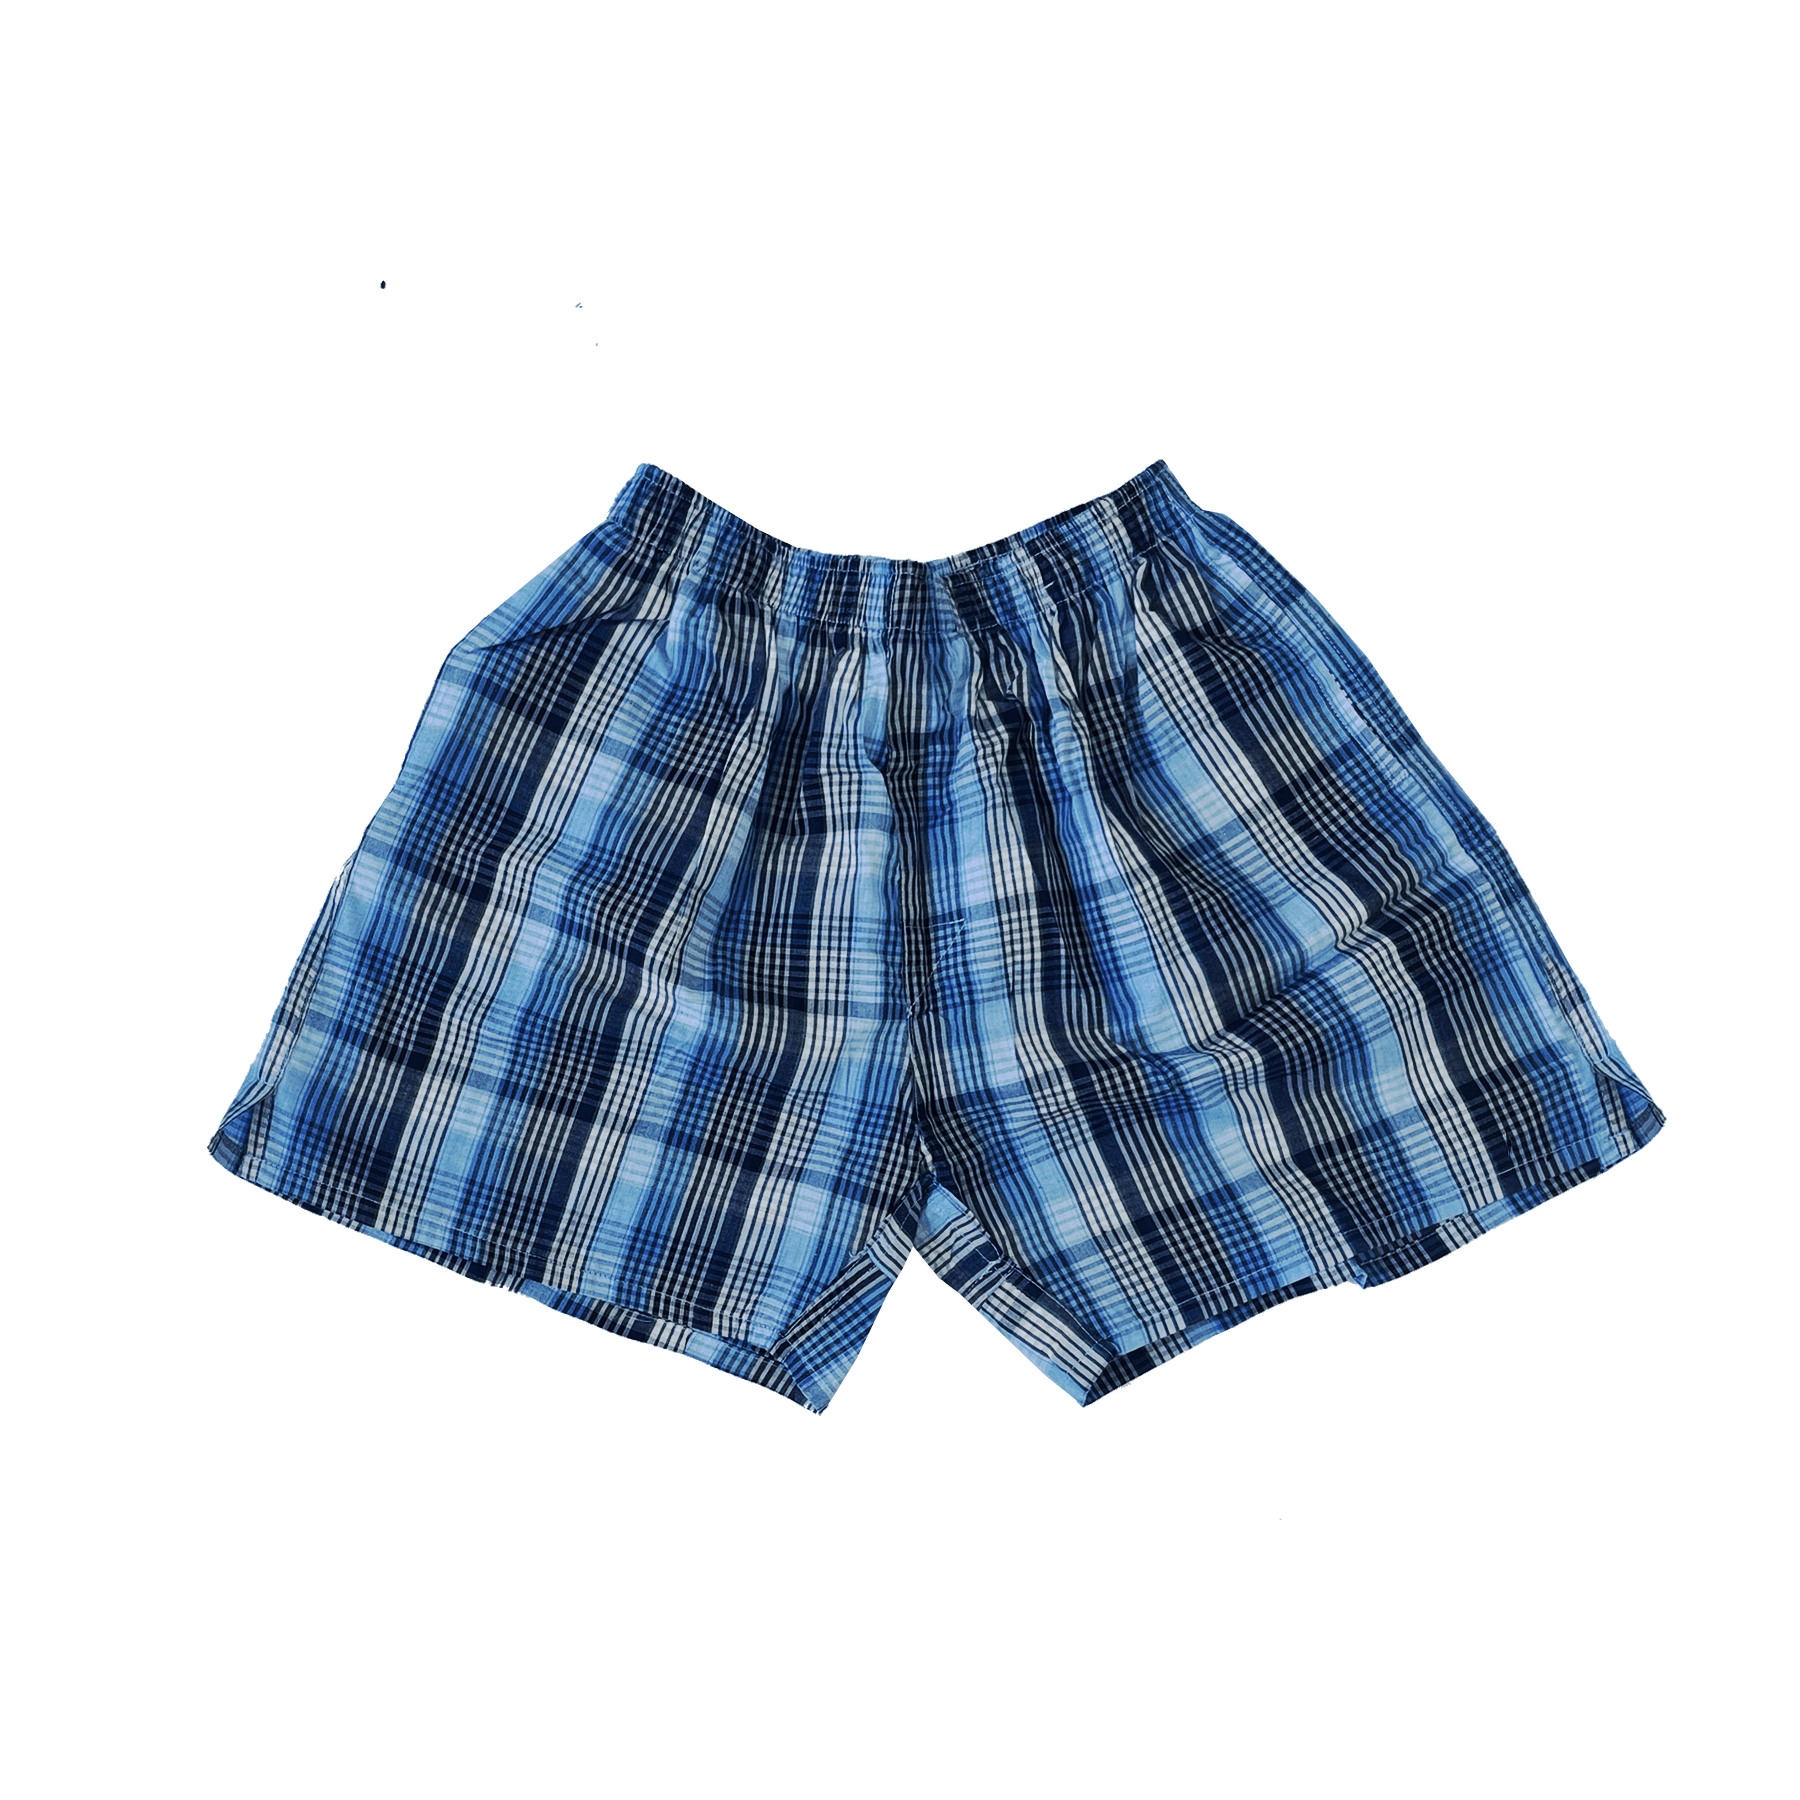 High Quality Short Pants For Men Ready To Ship For Men Odm Each One In Opp Bag From Vietnam Manufacturer